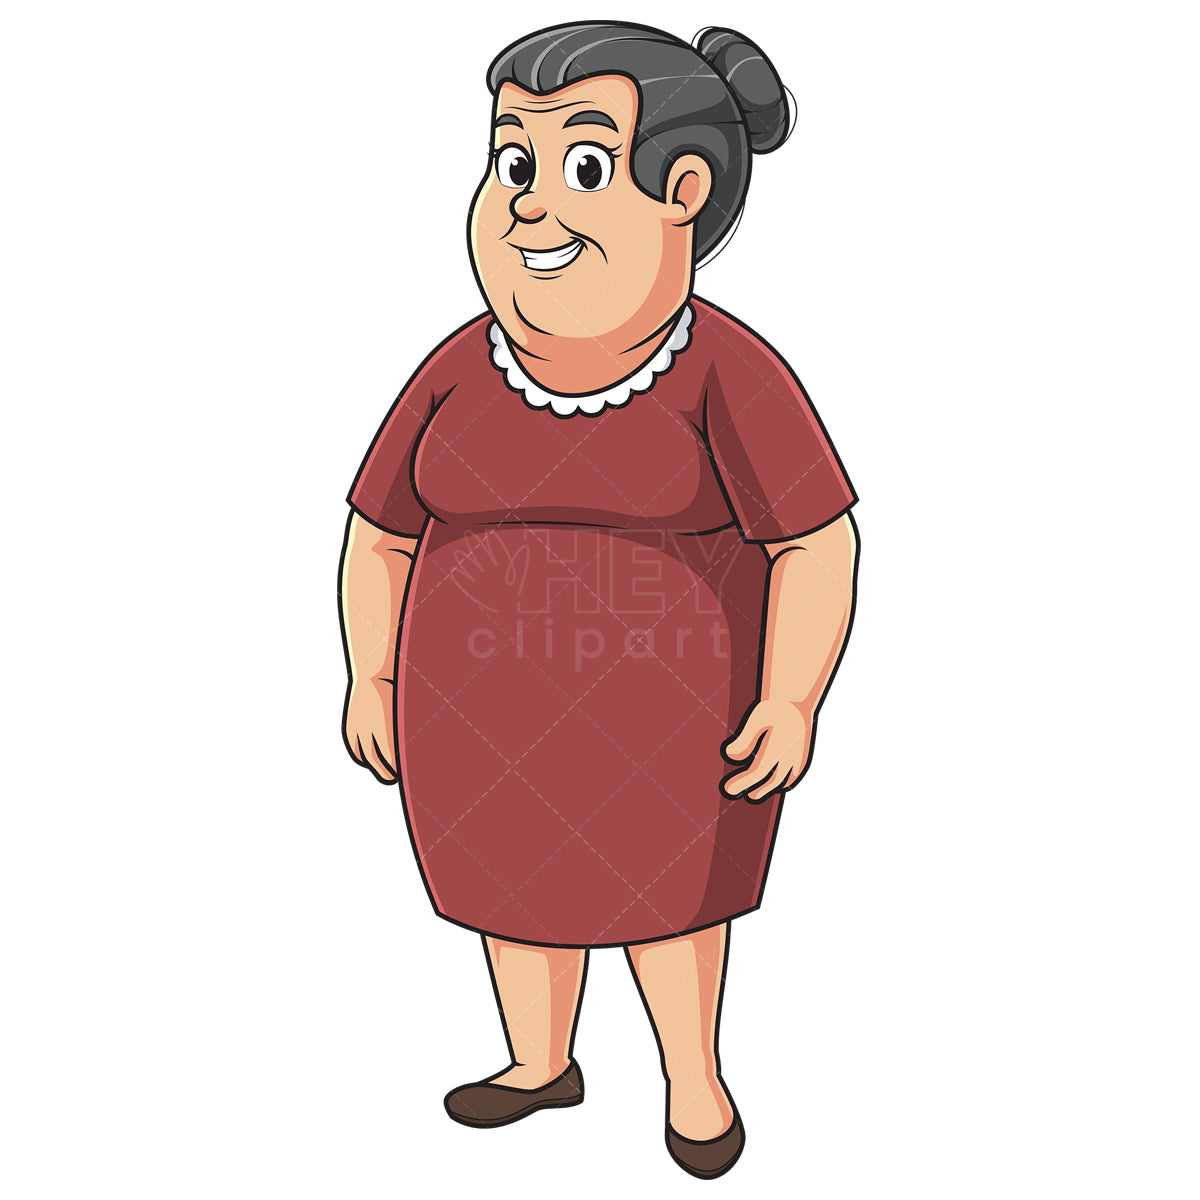 Royalty-free stock vector illustration of a chubby middle aged woman.